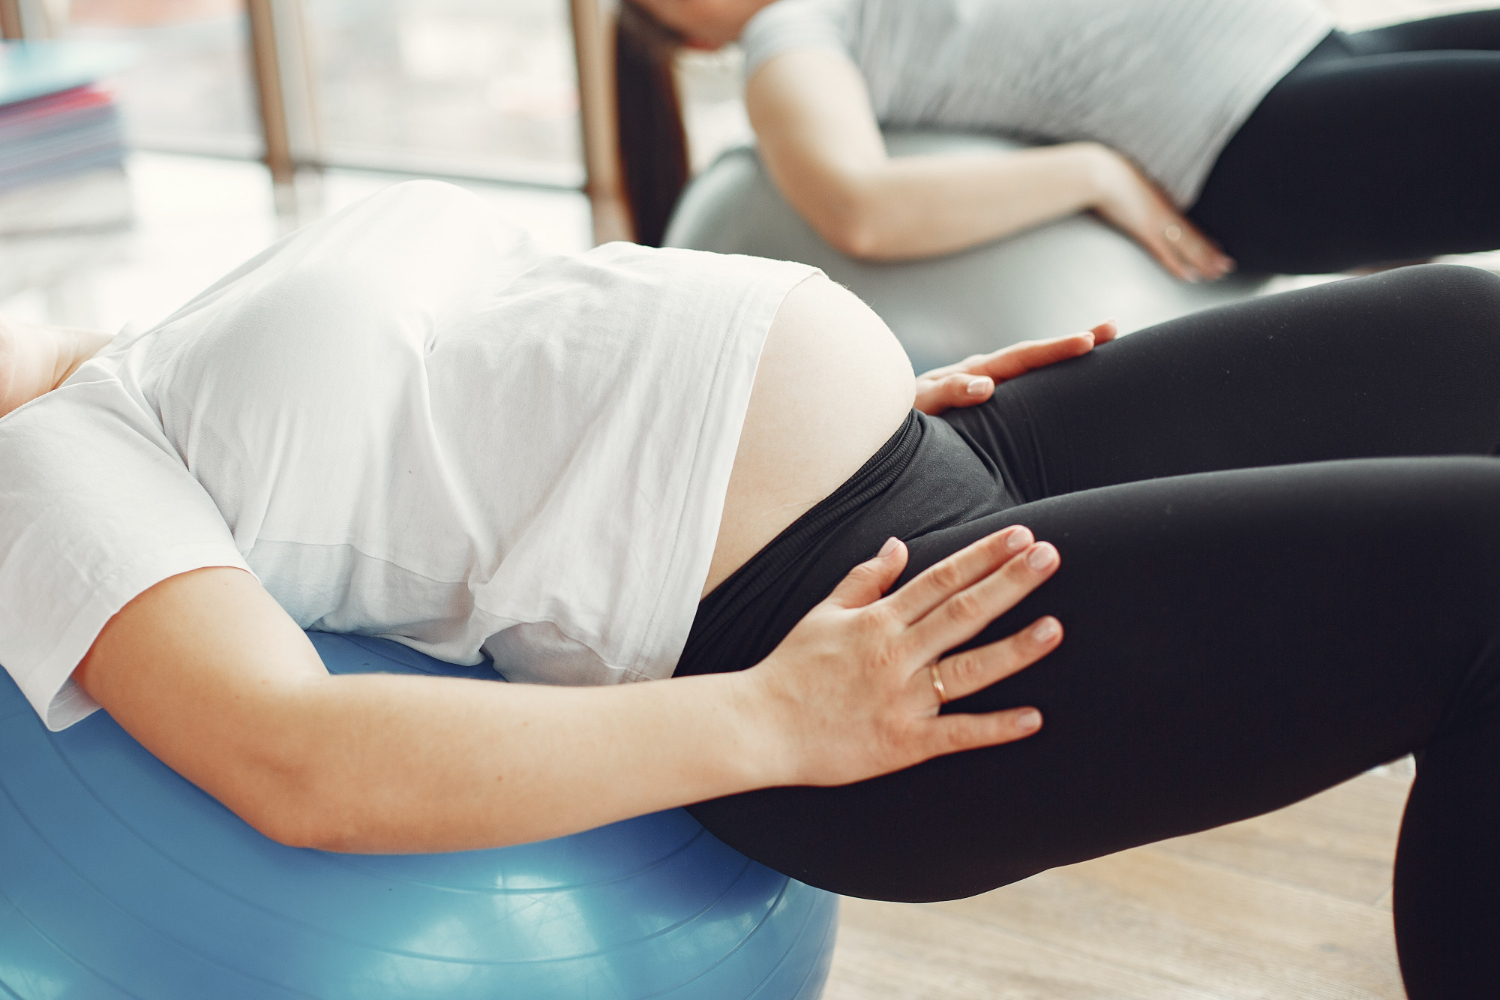 What exercise should I do in Pregnancy? — Liz Knowles